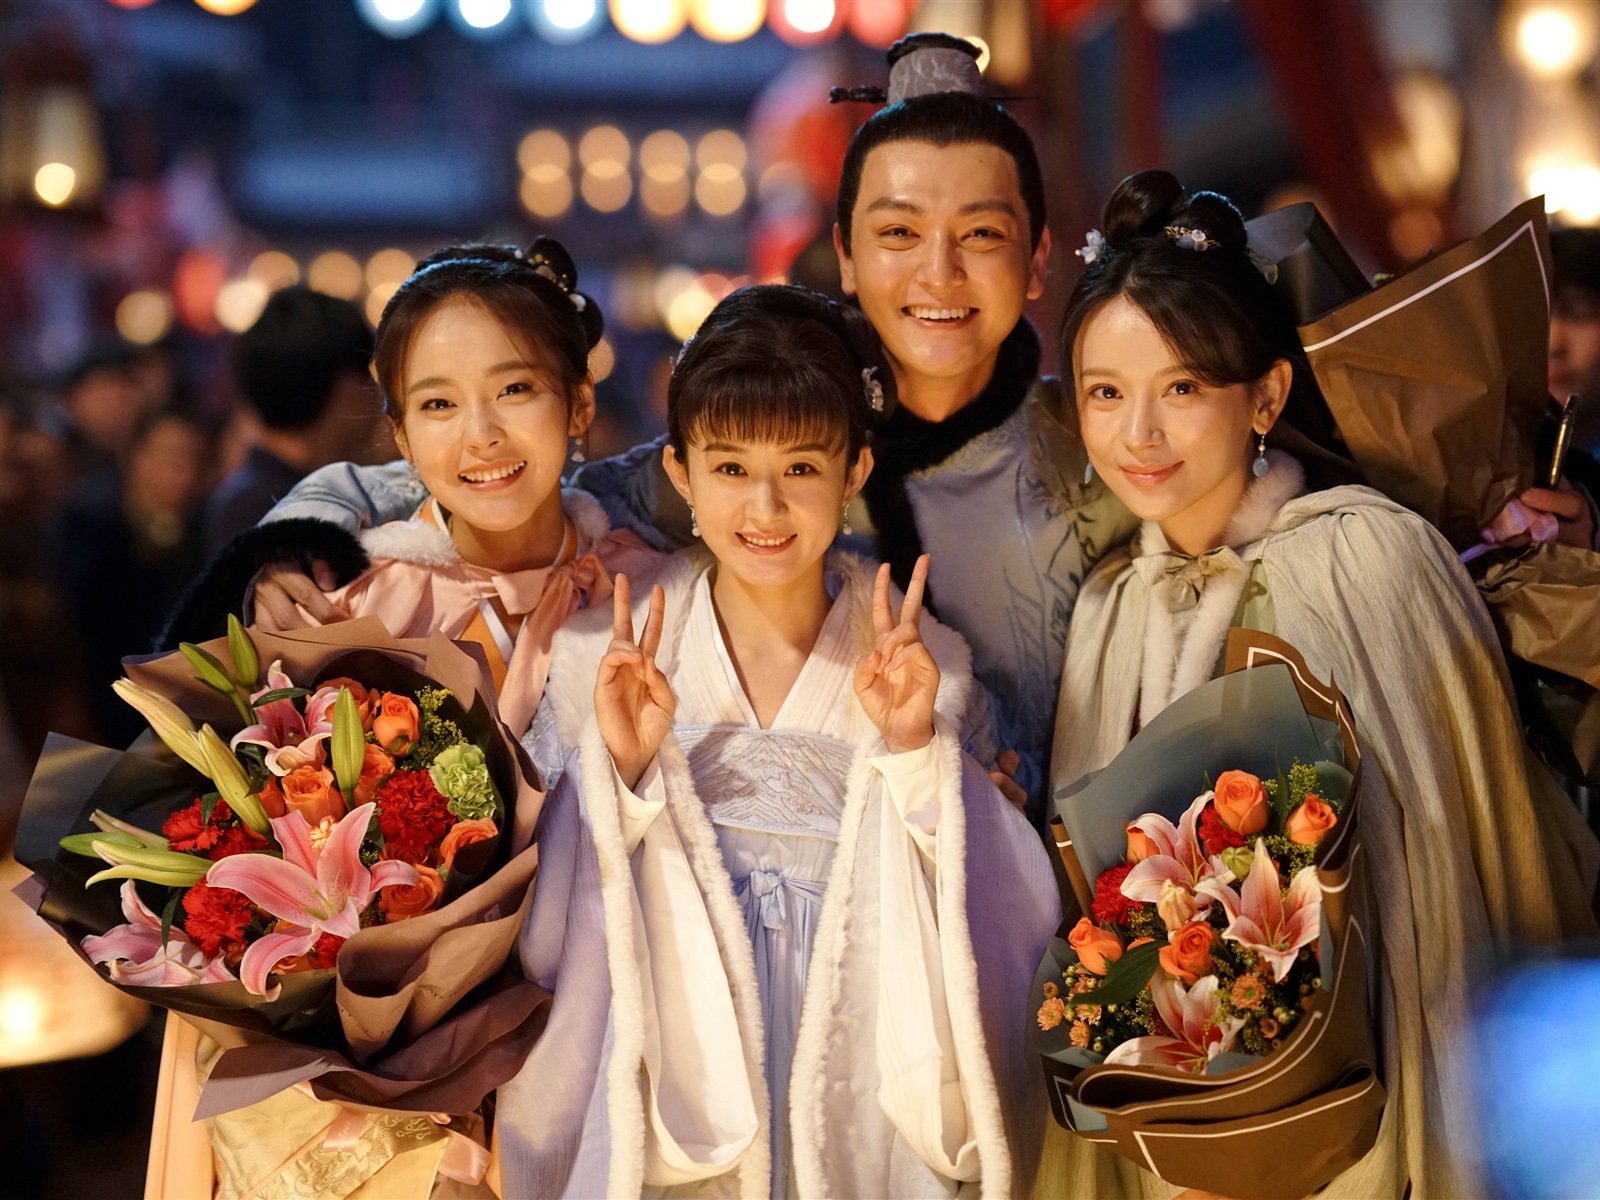 The Story Of MingLan, TV series HD wallpapers #48 - 1600x1200